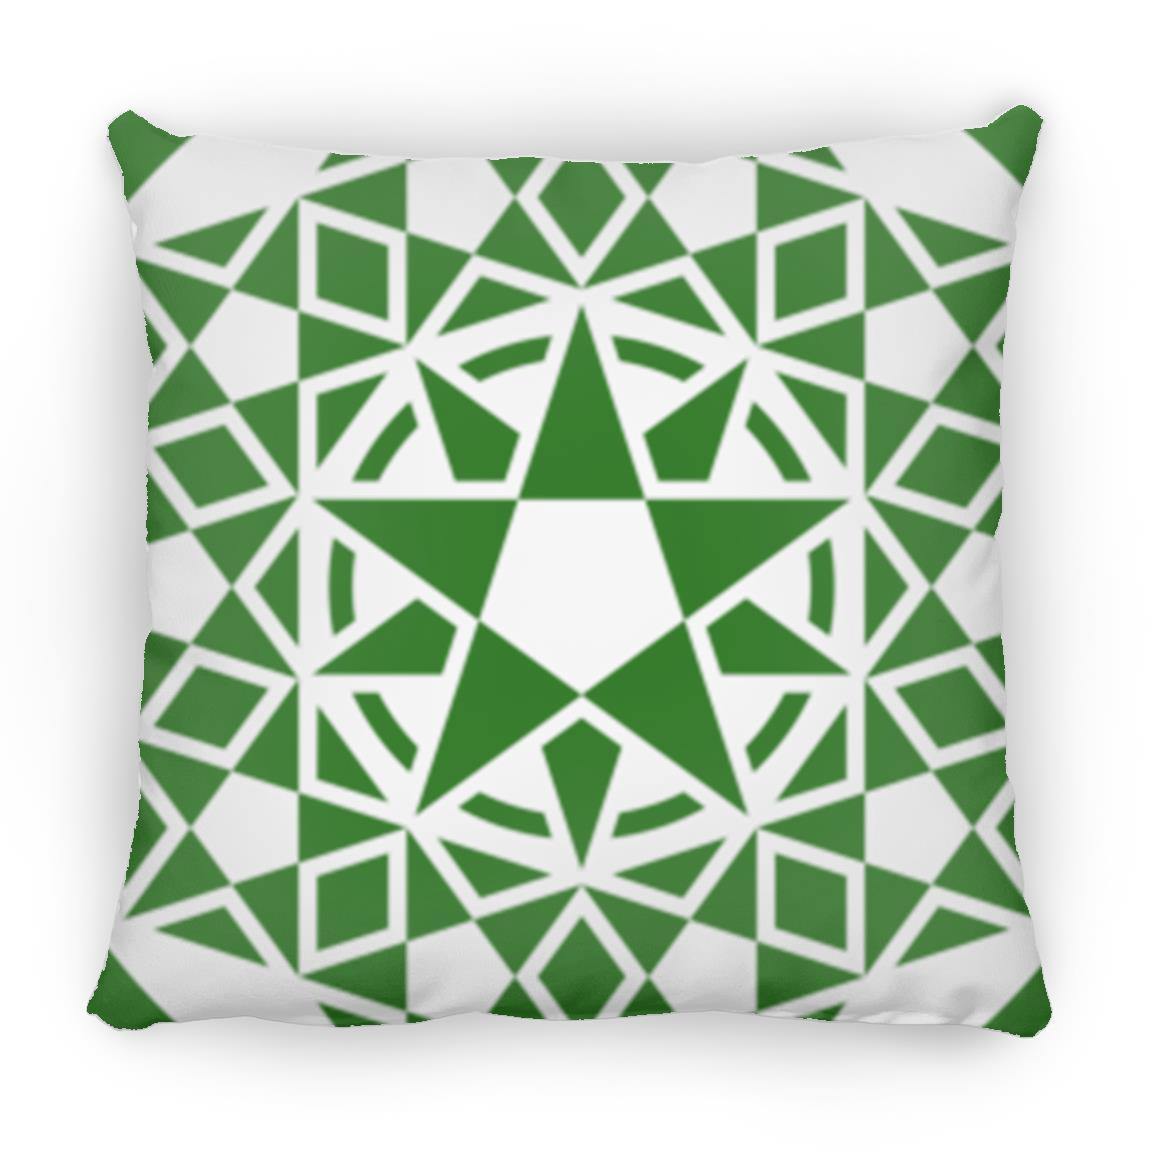 Crop Circle Pillow - Hackpen Hill - Shapes of Wisdom